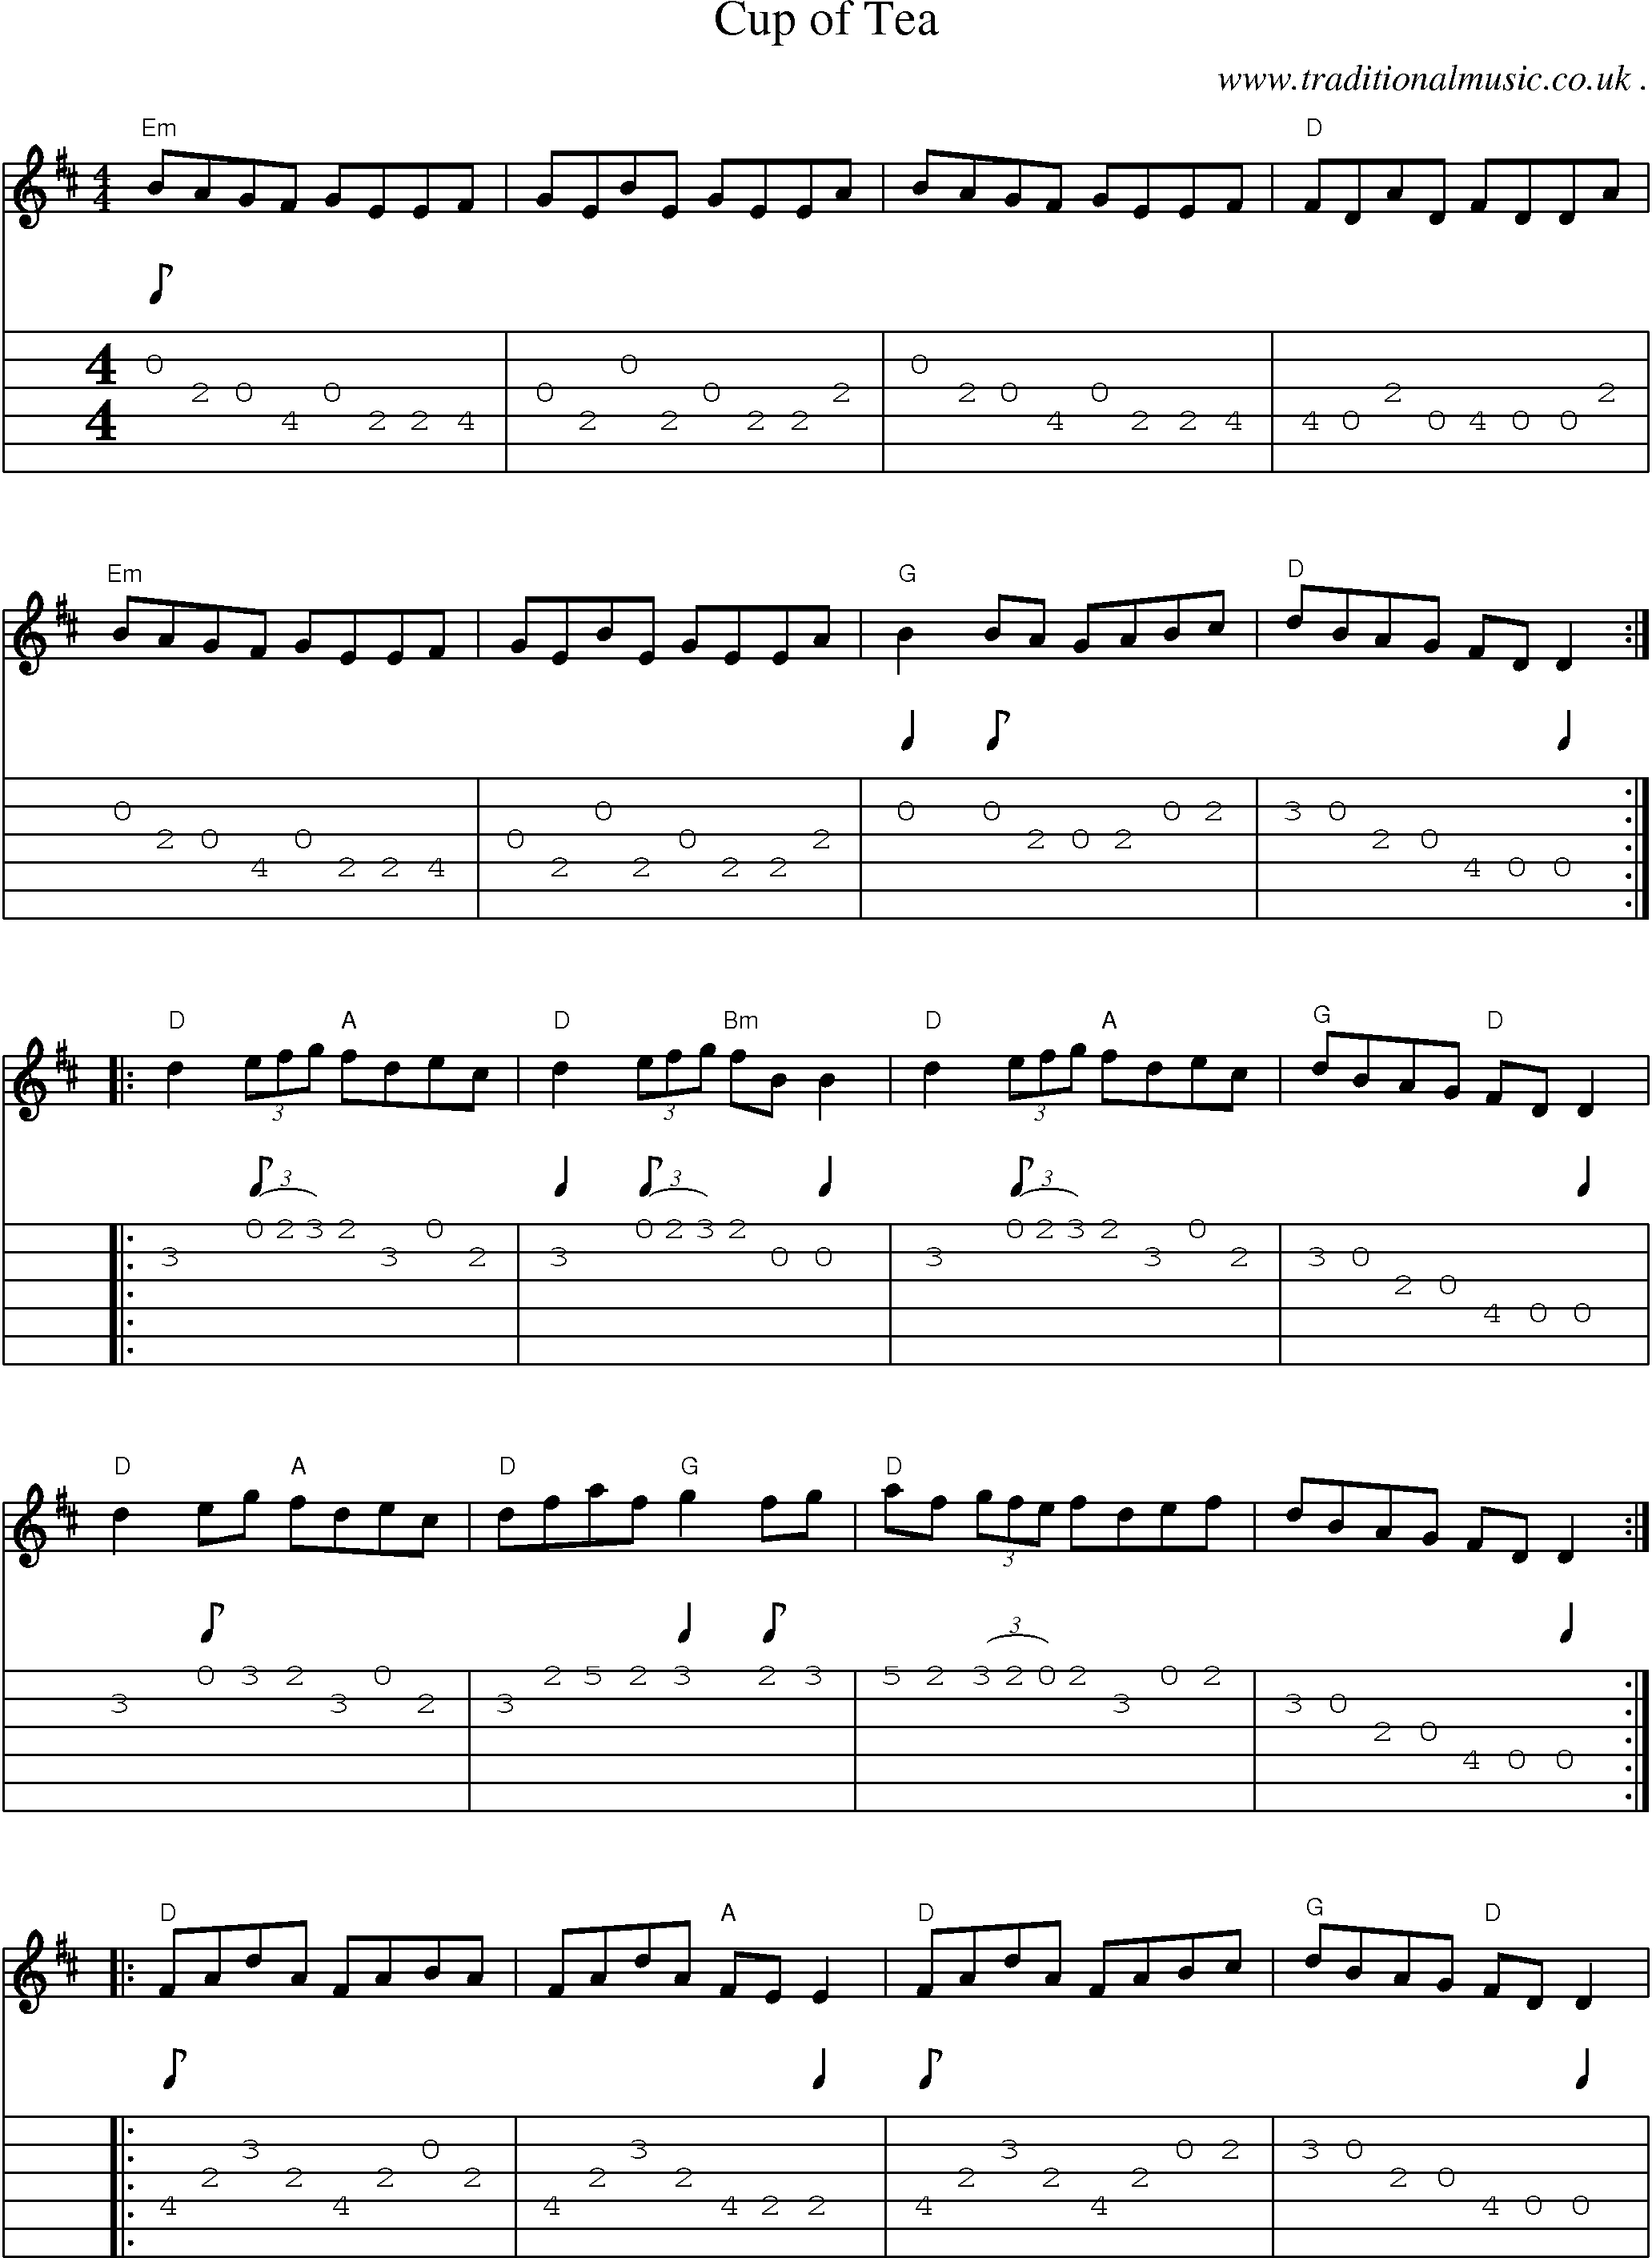 Music Score and Guitar Tabs for Cup Of Tea